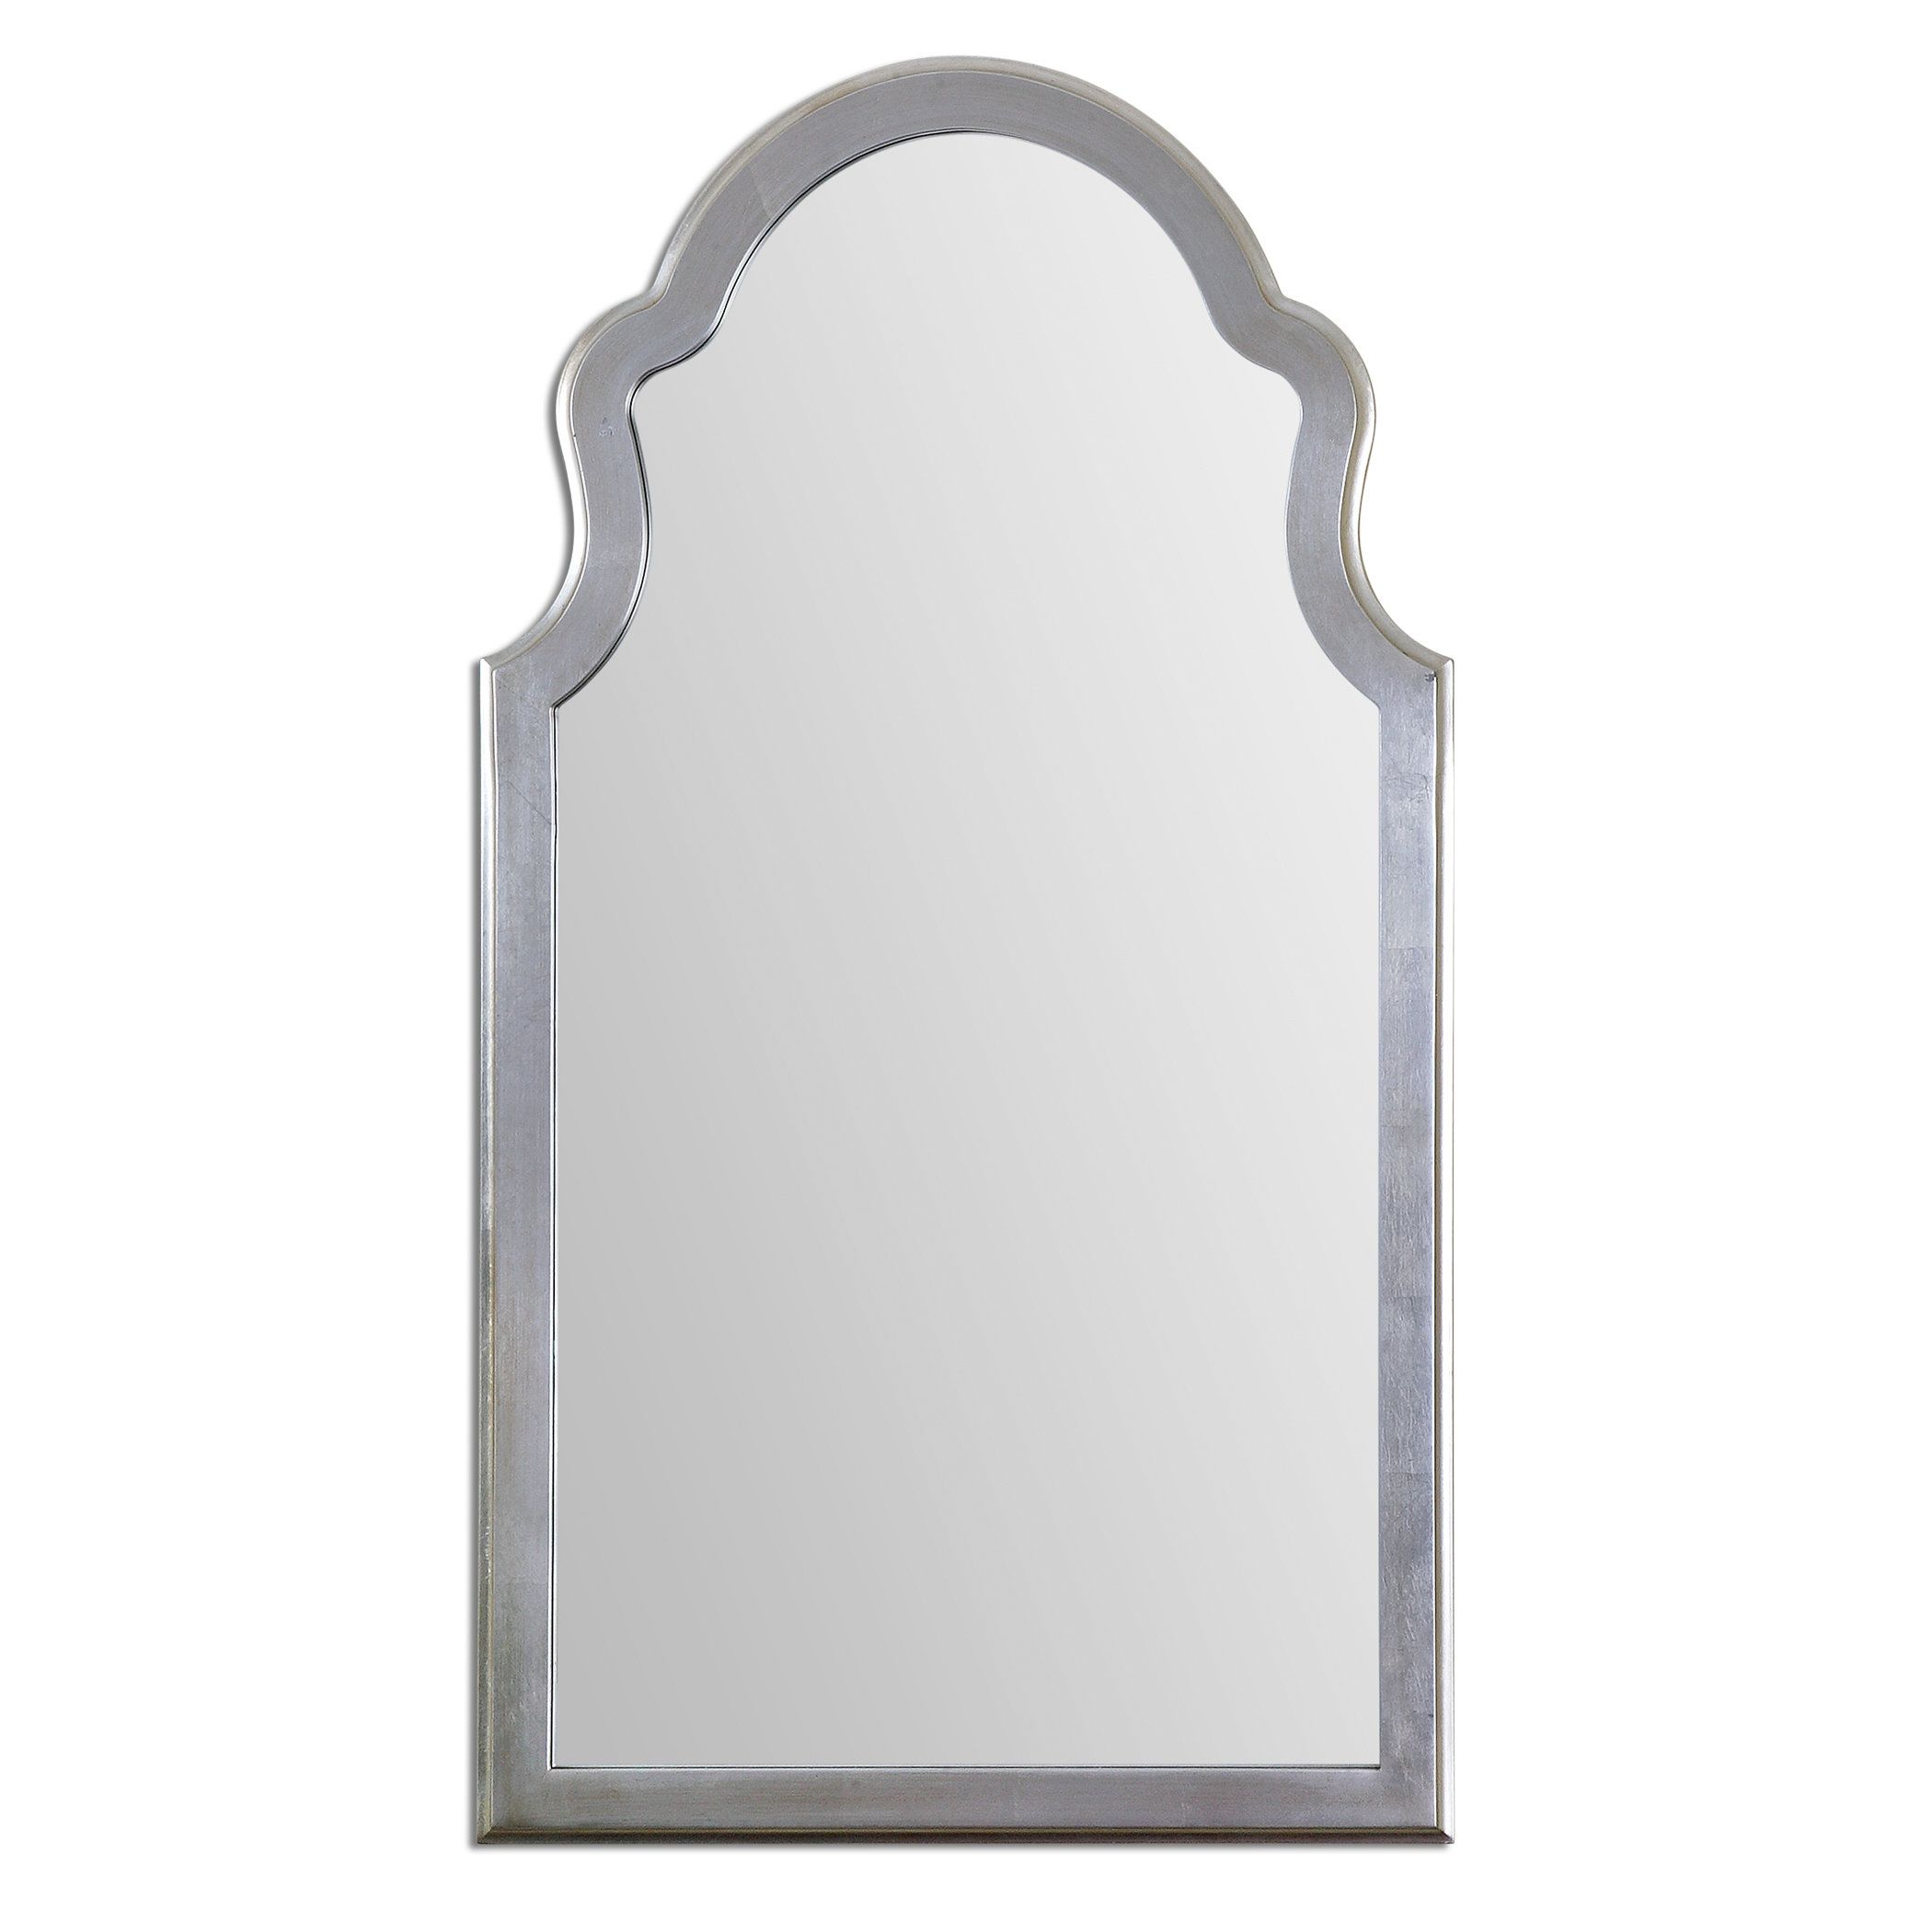 Farmhouse & Rustic Alcott Hill Wall & Accent Mirrors | Birch Throughout Morlan Accent Mirrors (View 9 of 20)